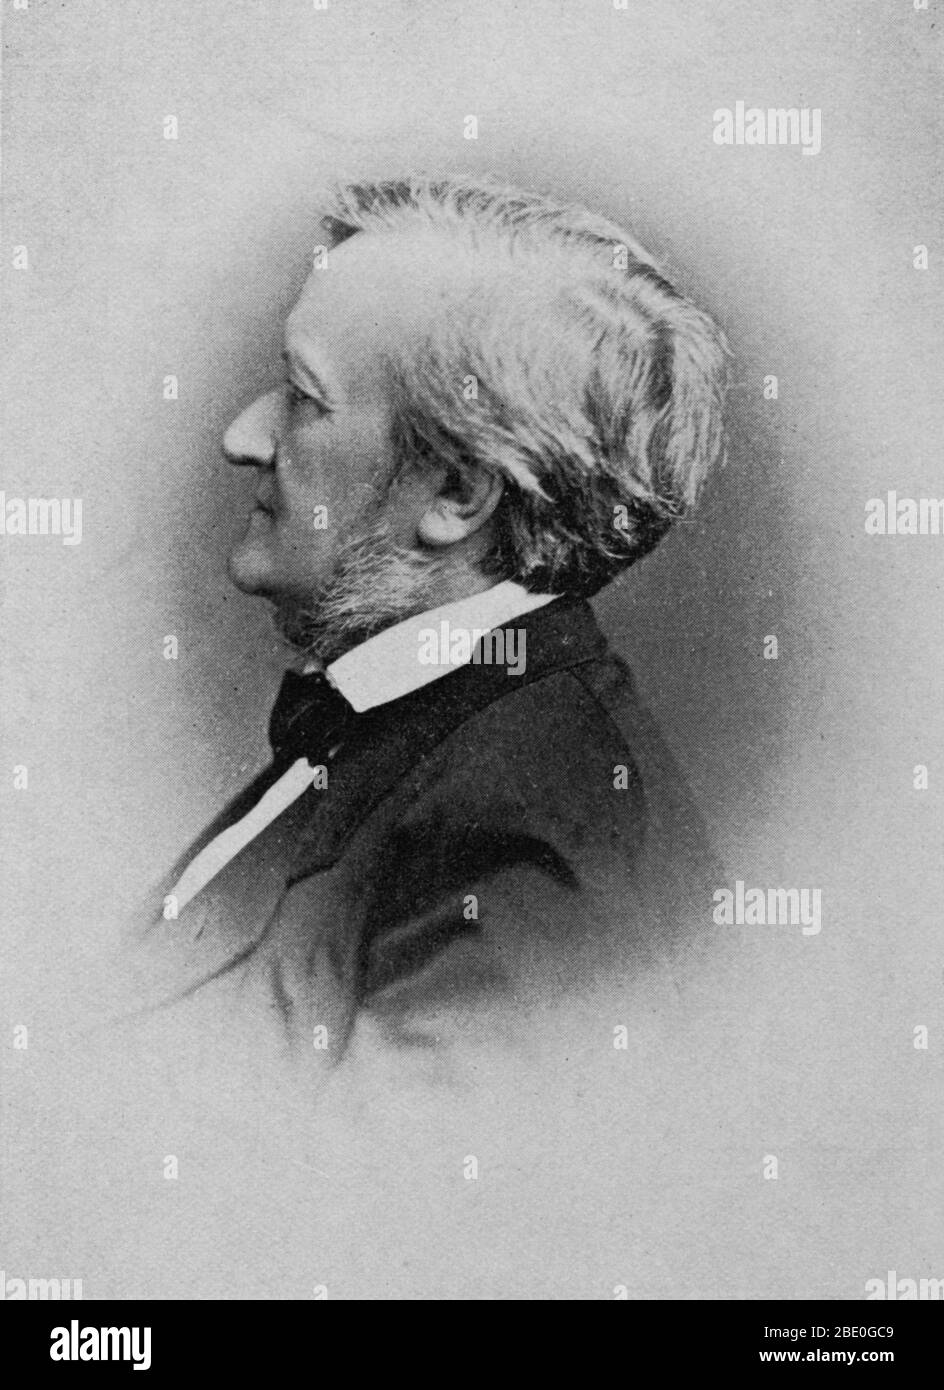 Wilhelm Richard Wagner (May 22, 1813 - February 13, 1883) was a German composer, theater director, polemicist, and conductor. Unlike most opera composers, Wagner wrote both the libretto and the music for each of his stage works. He revolutionized opera through his concept of the Gesamtkunstwerk, by which he sought to synthesize the poetic, visual, musical and dramatic arts, with music subsidiary to drama, and which was announced in a series of essays between 1849-52. His compositions are notable for their complex textures, rich harmonies and orchestration, and the elaborate use of leitmotifs- Stock Photo